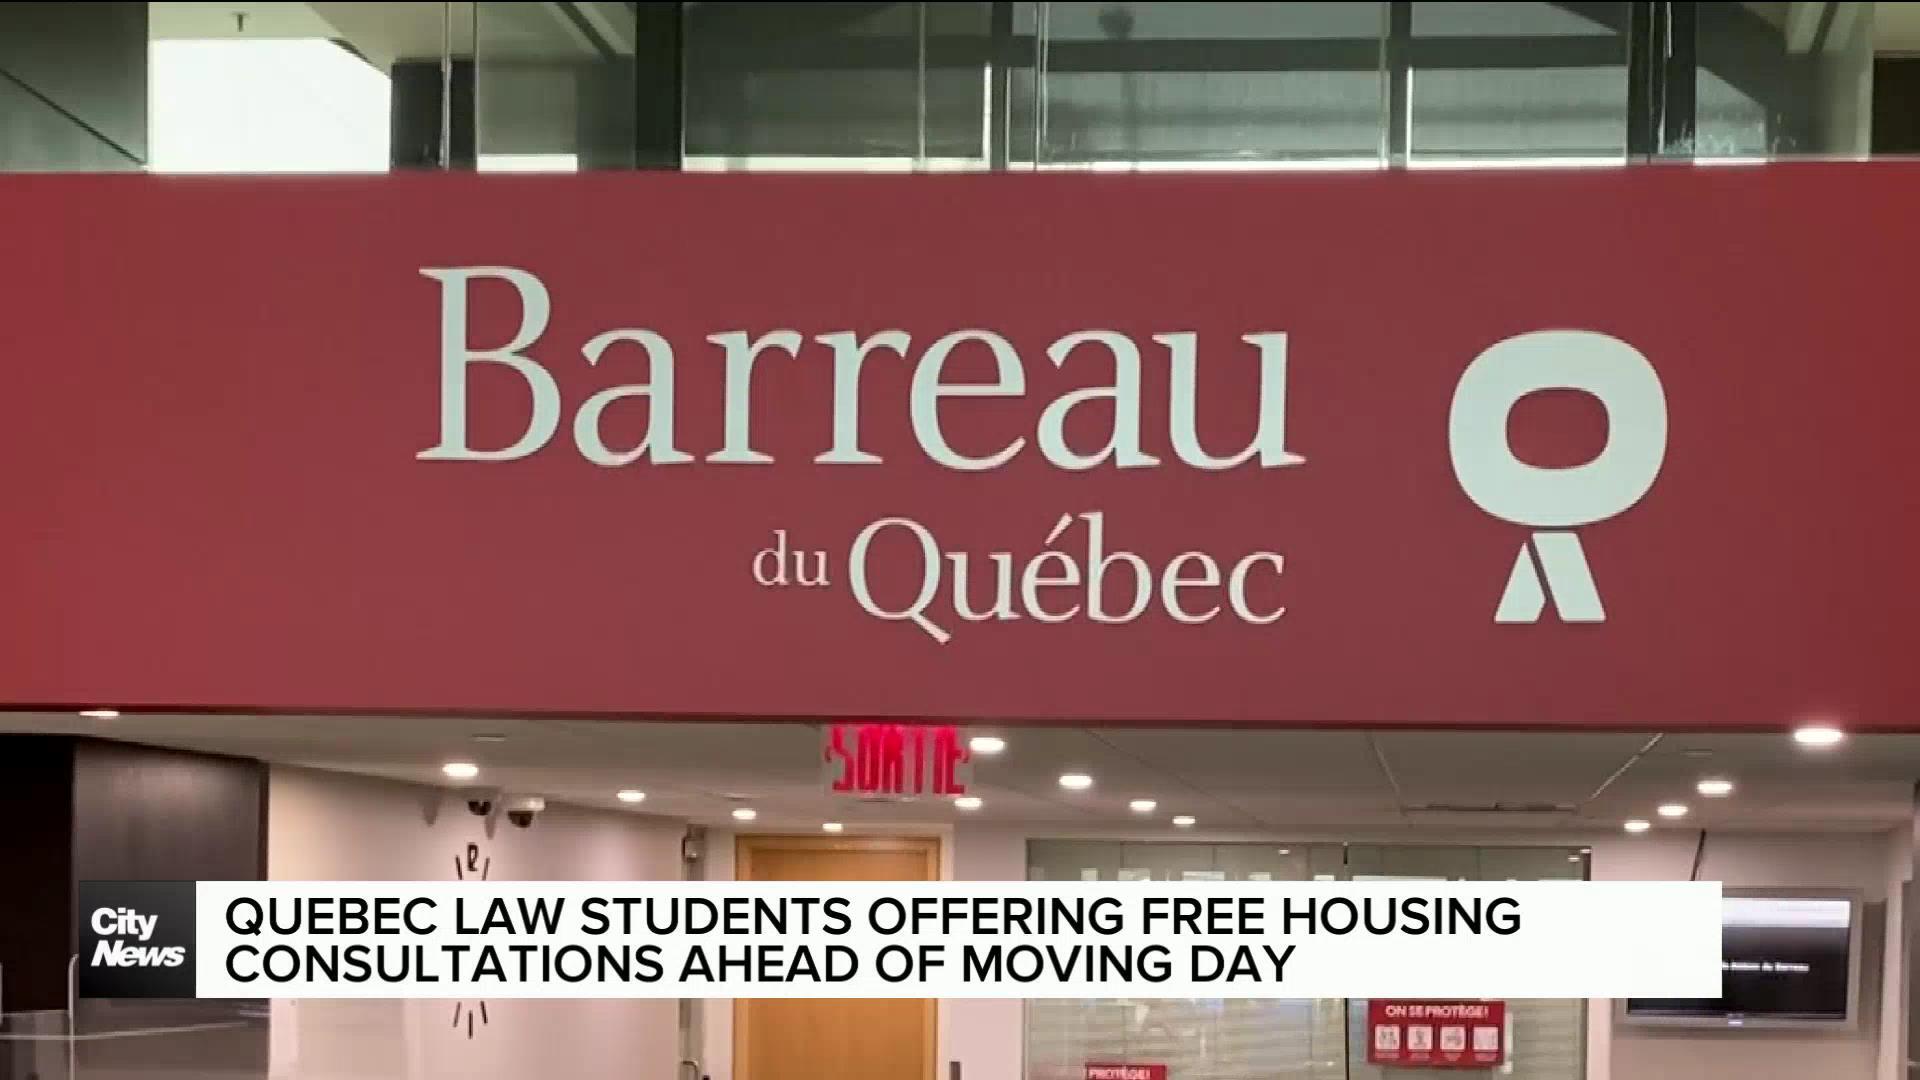 Quebec law students offering free consultations amid housing crisis